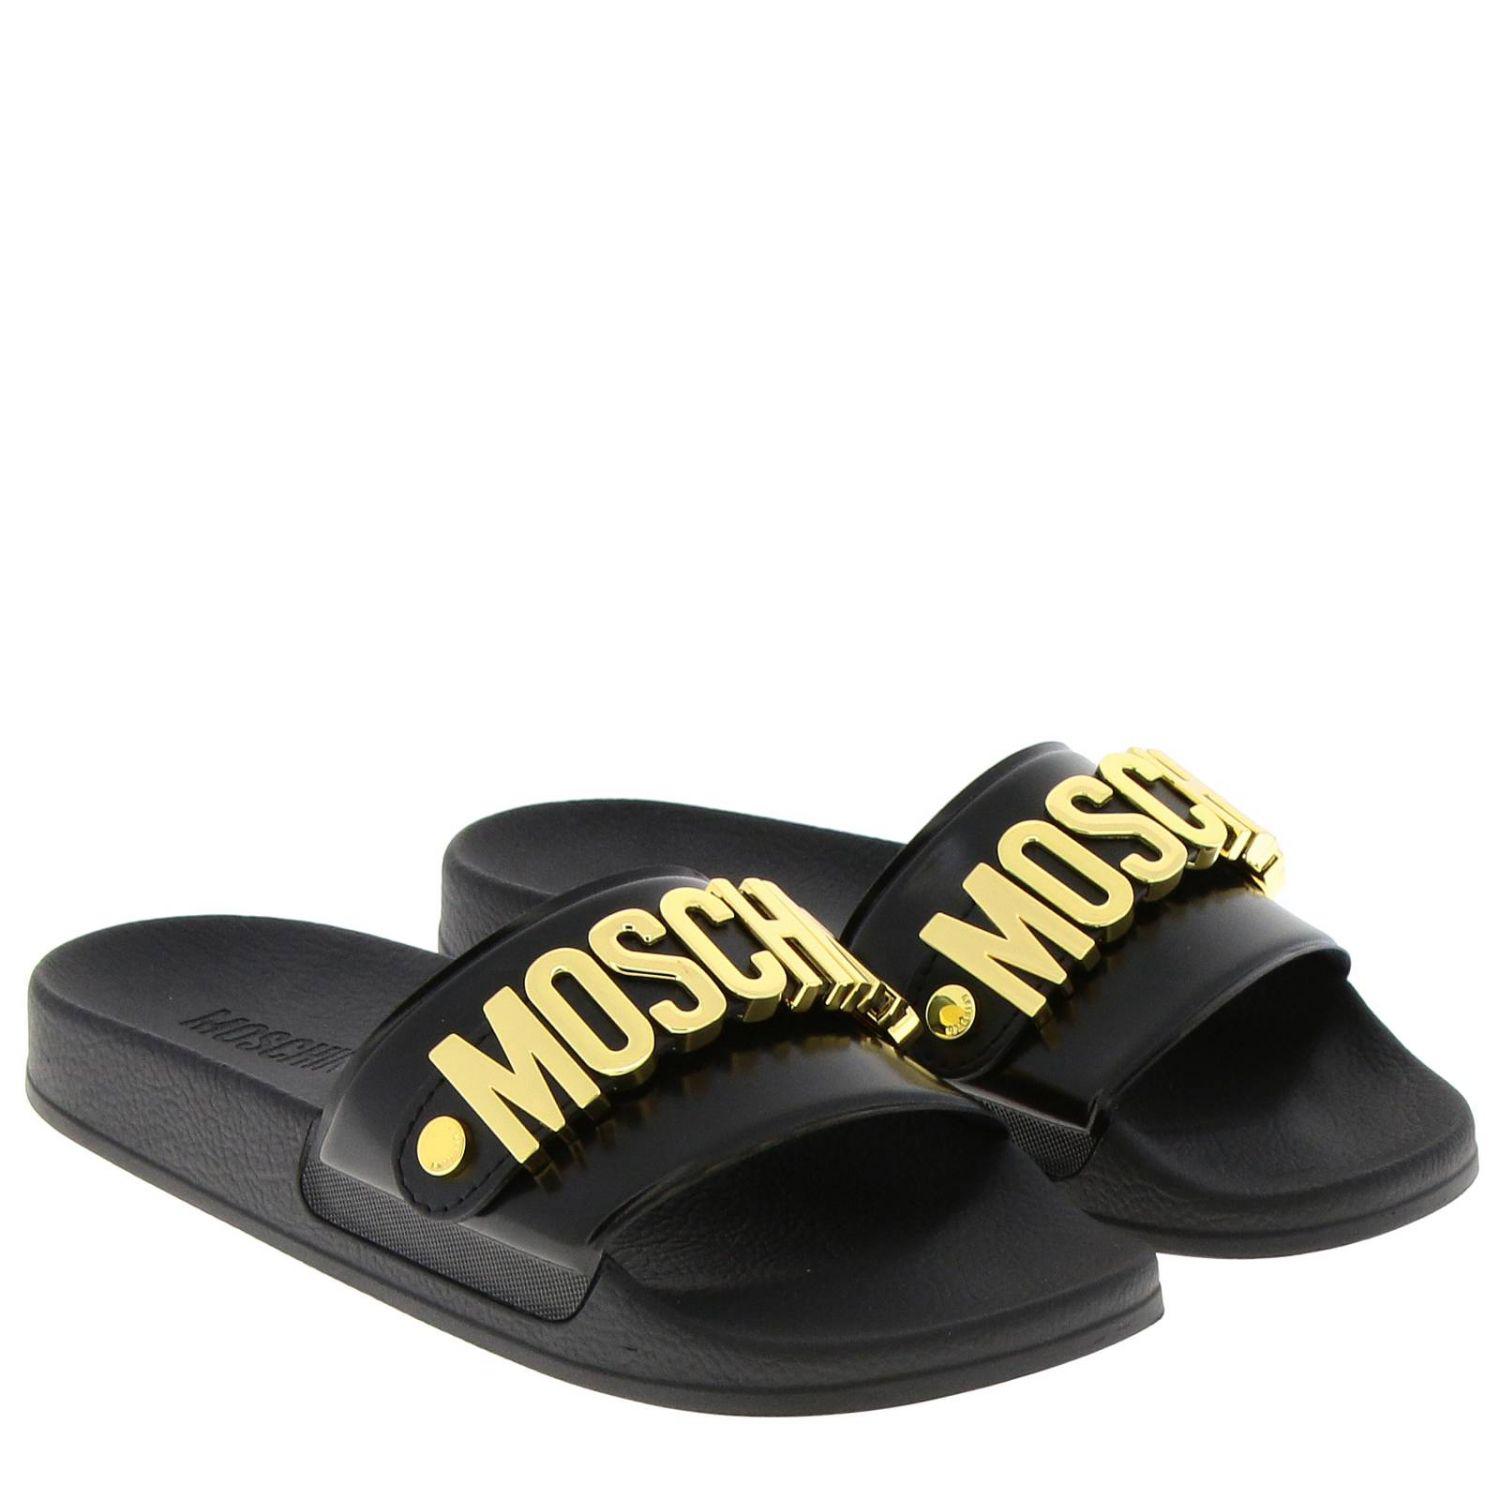 Moschino Couture Flat Sandals Shoes Women in Black - Lyst